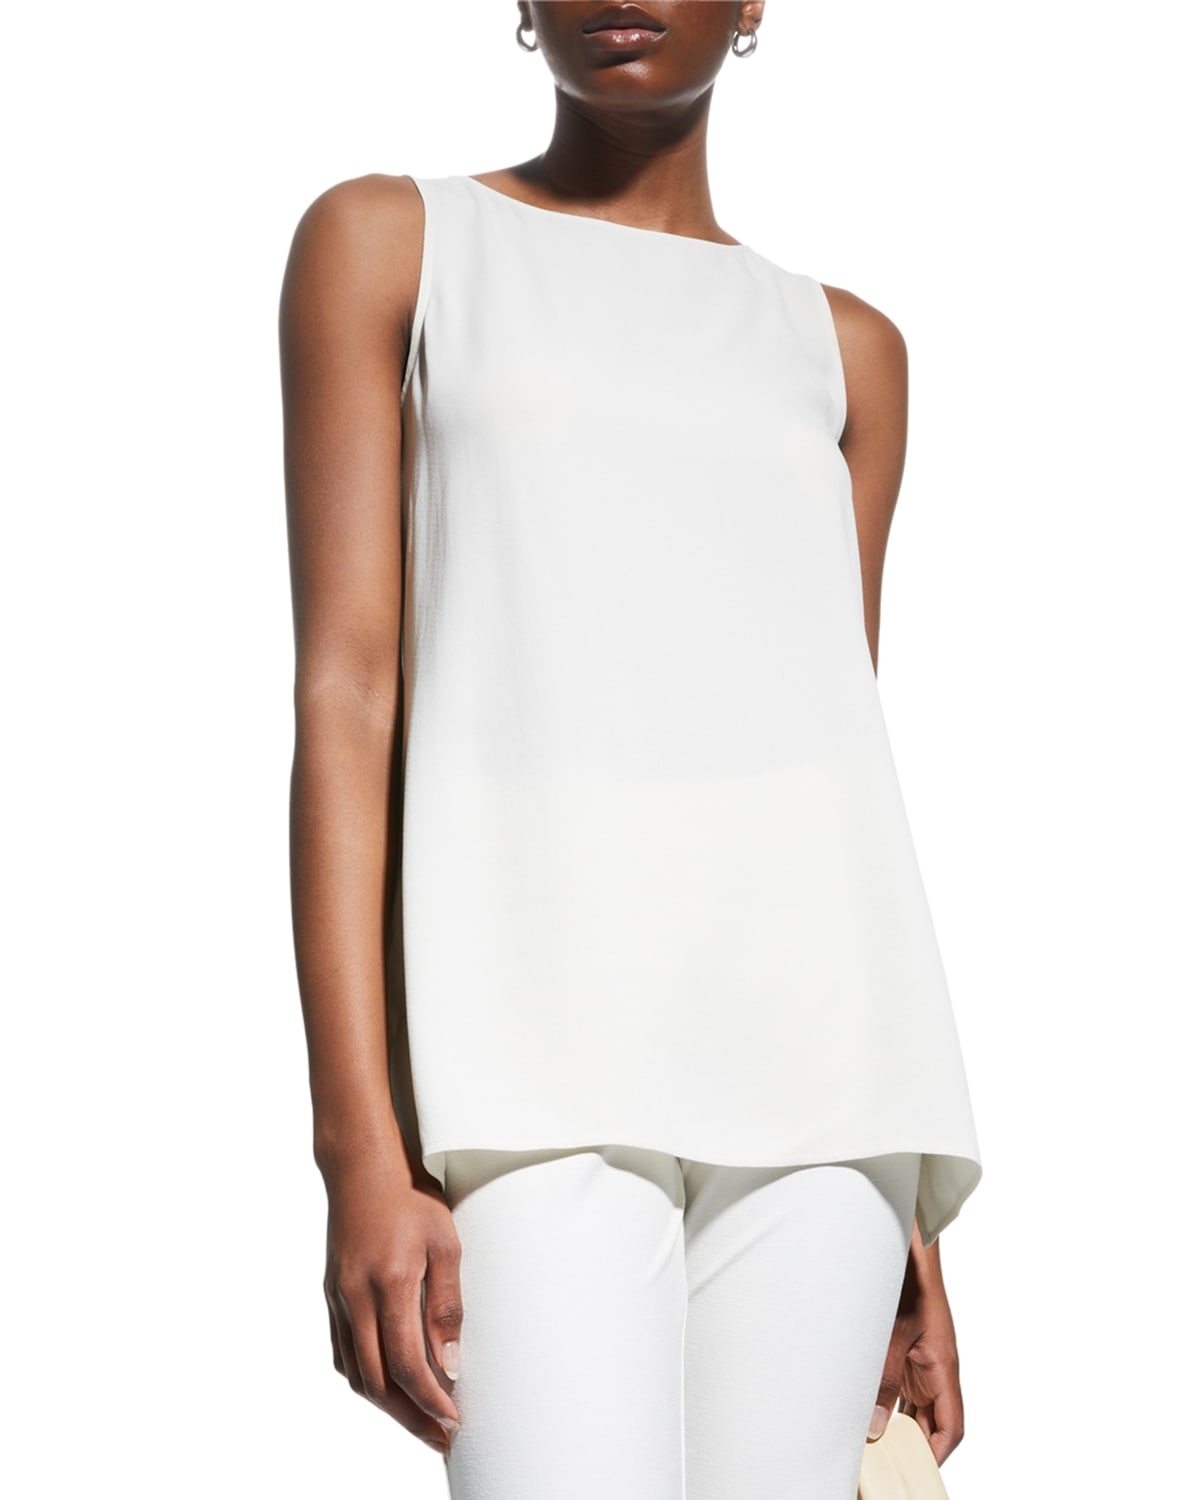 Eileen Fisher Washable Stretch Crepe Ankle Pants White Petite, $168, Neiman Marcus